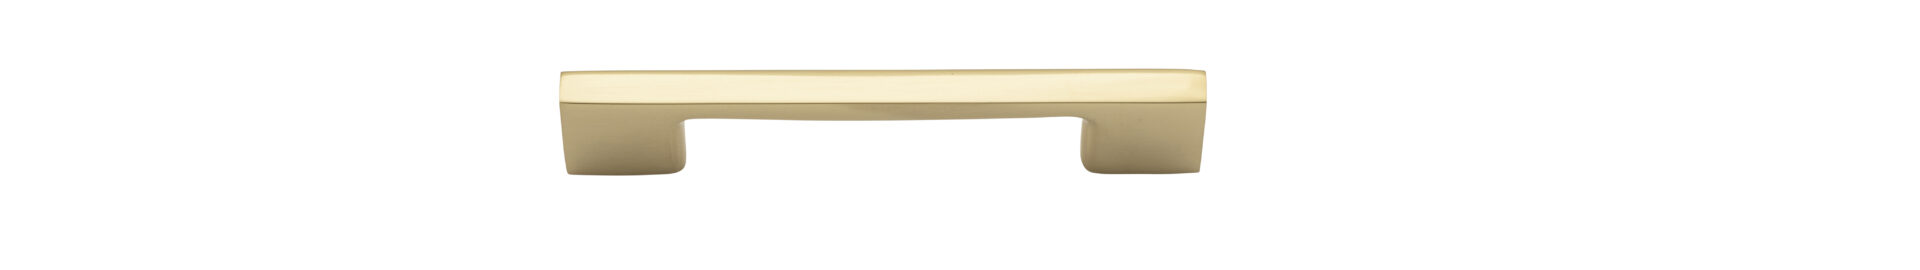 0514 - Cali Cabinet Pull - 96mm - Polished Brass